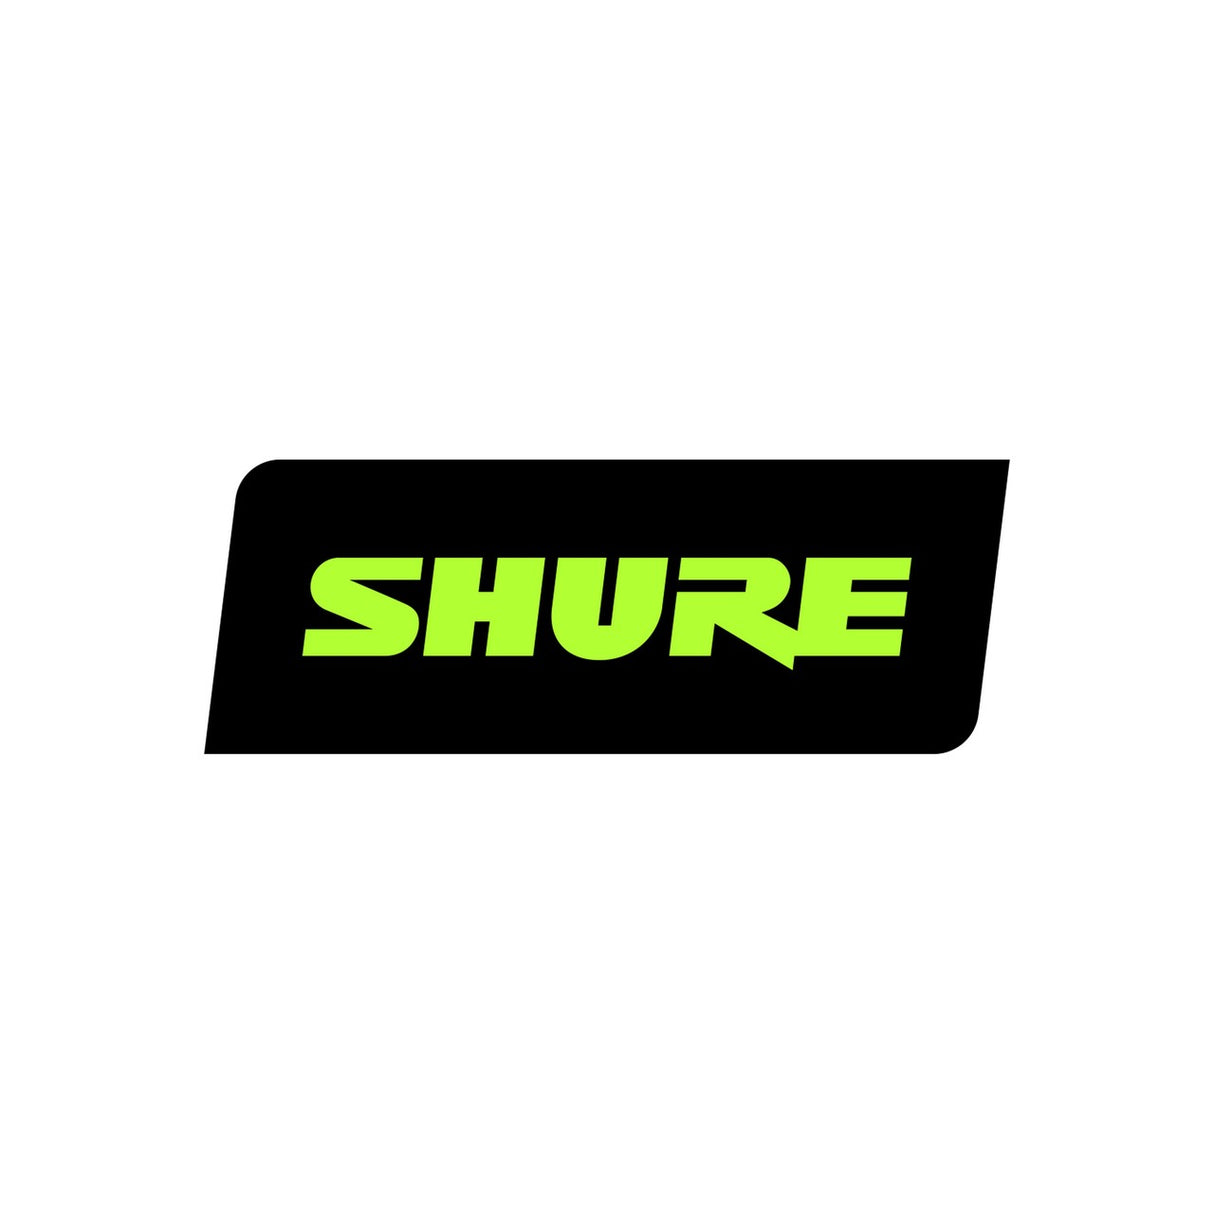 Shure WL50W | 5 Foot Microflex Omnidirectional Subminiature Lavalier Microphone White